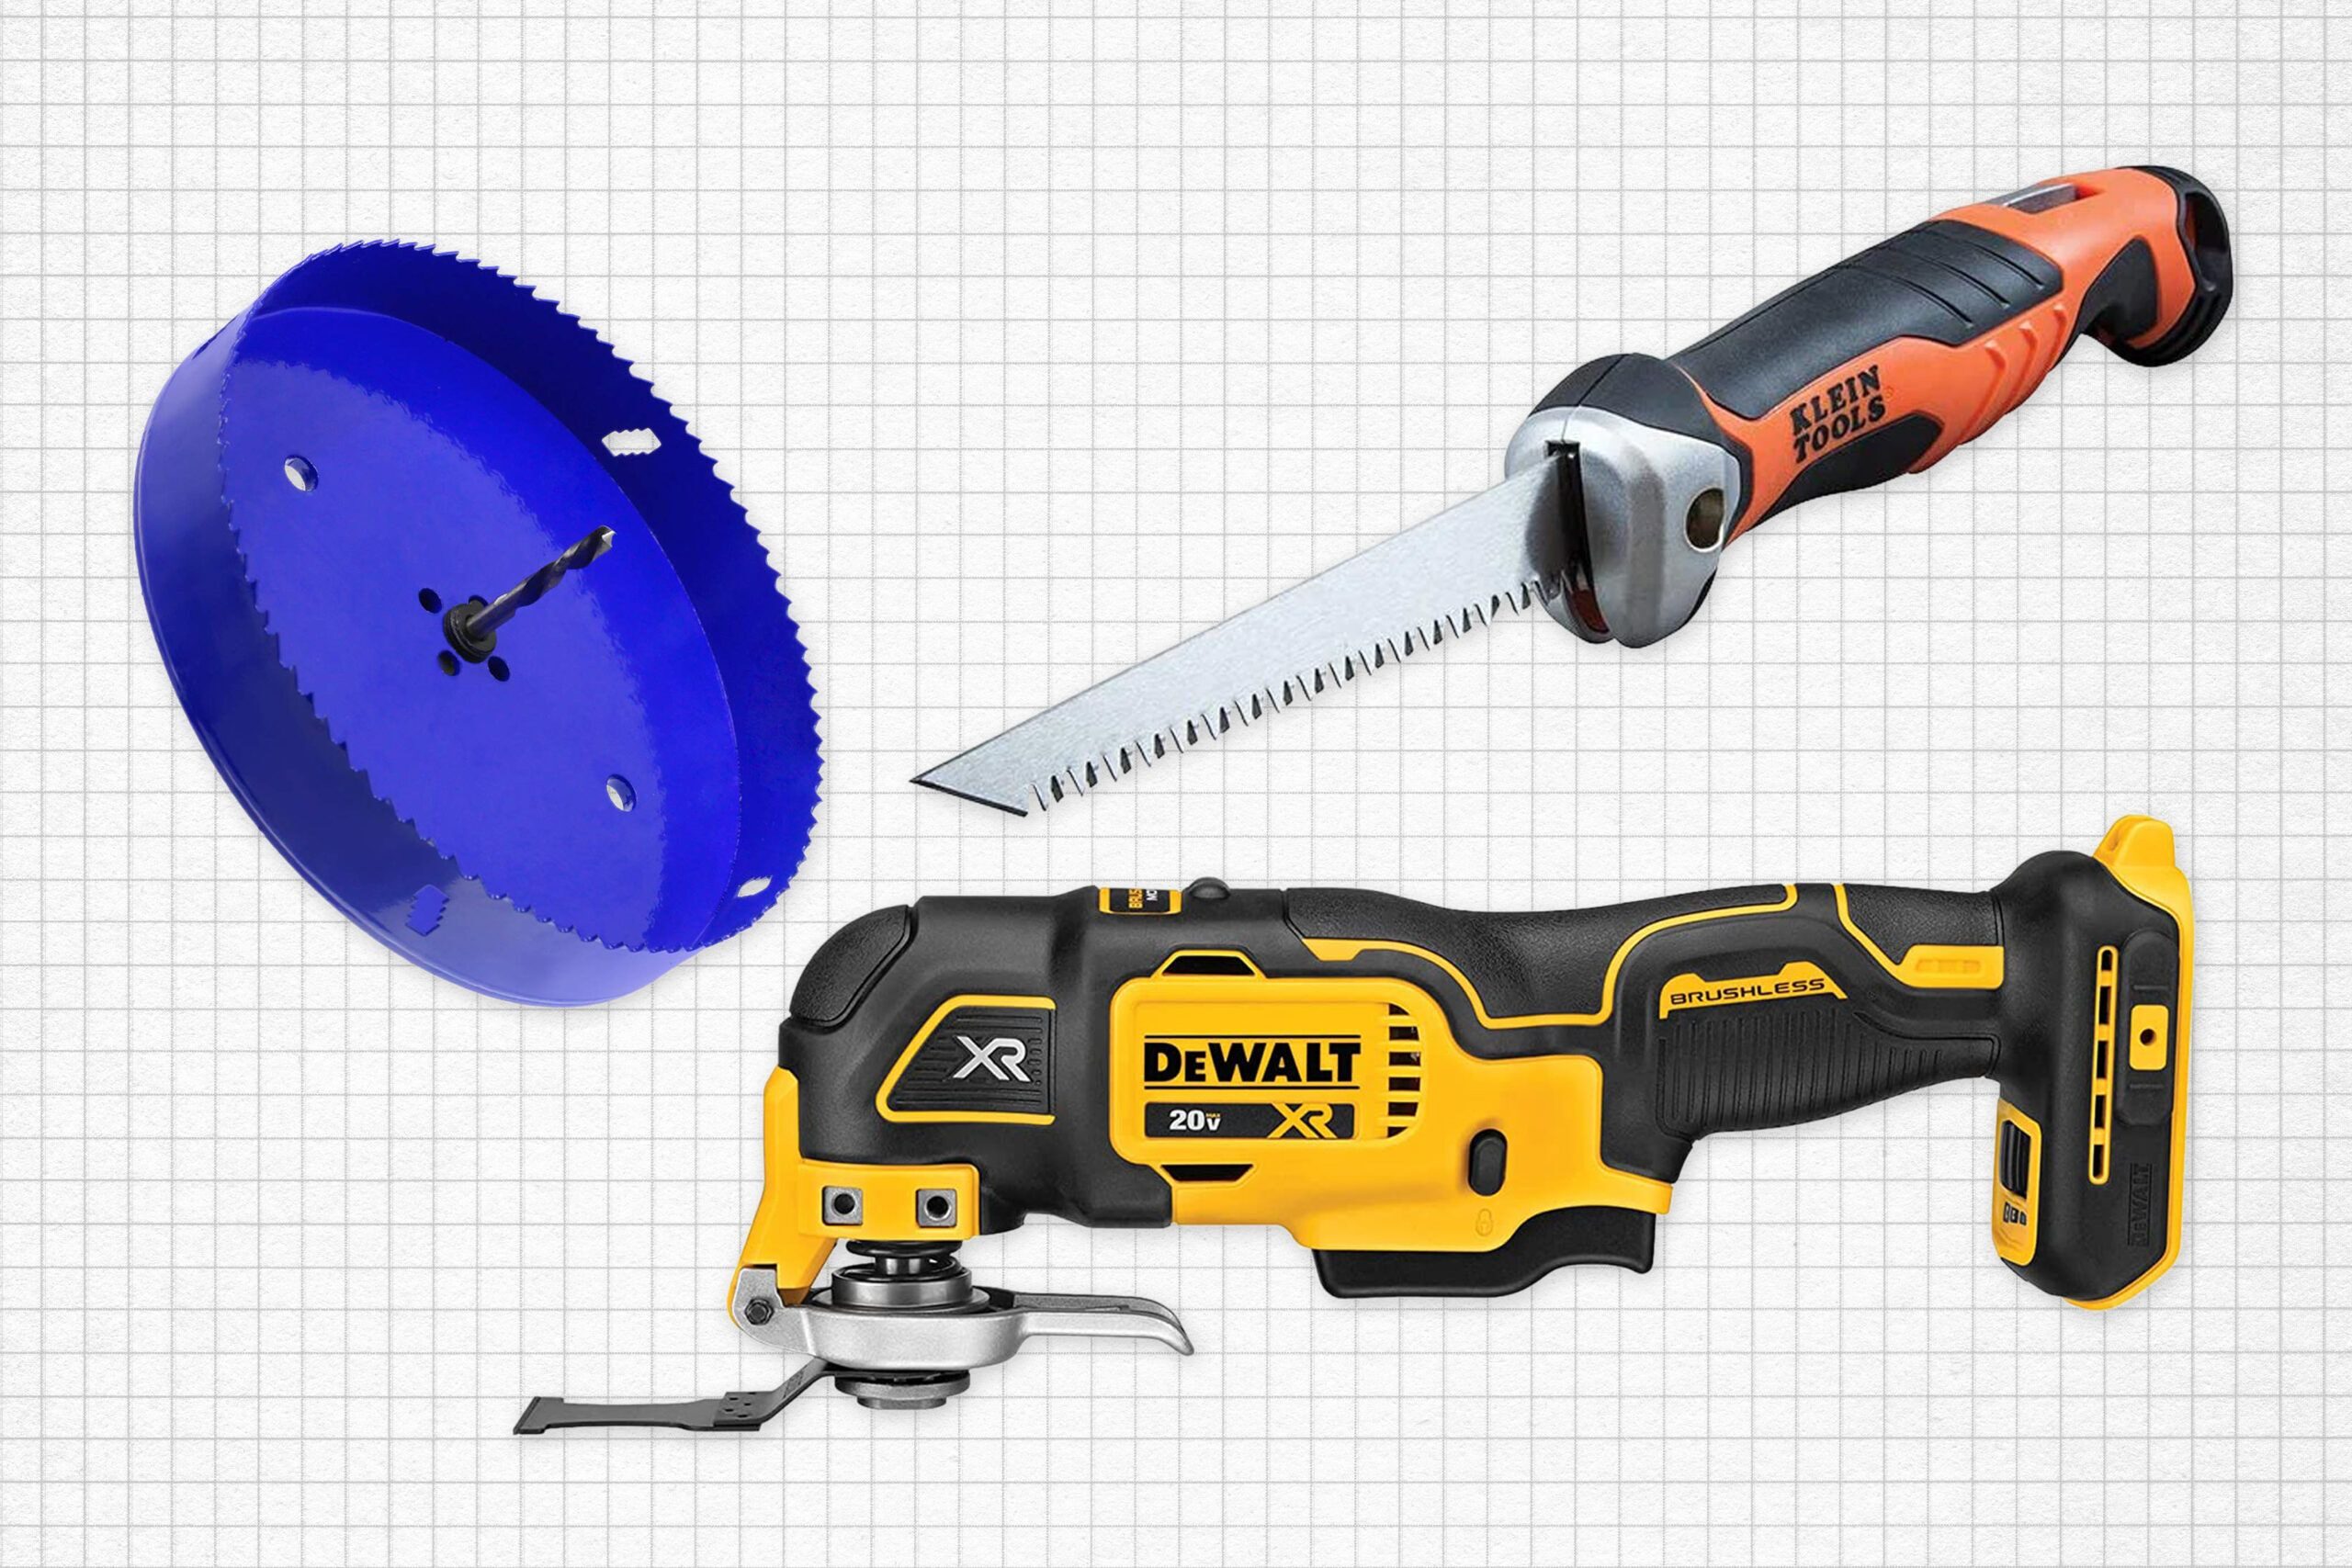 Hand vs. Power Tools: Right Choice for Best Tools for Cutting Drywall